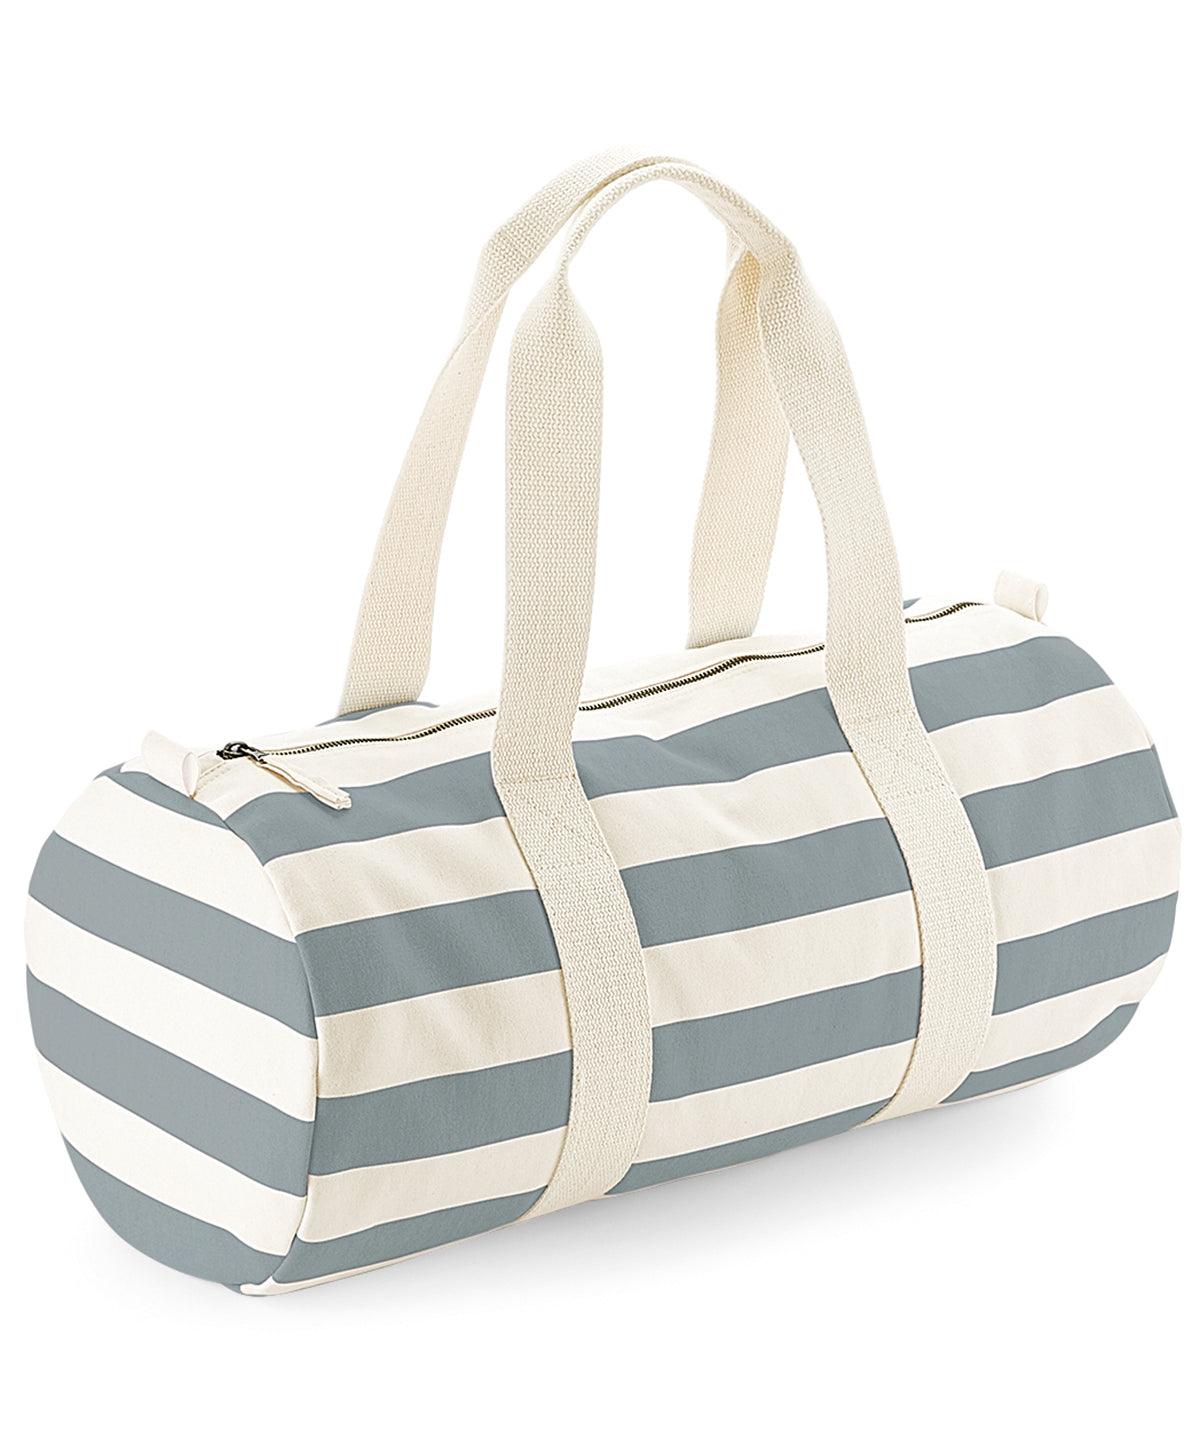 Natural/Grey - Nautical barrel bag Bags Westford Mill Bags & Luggage, Rebrandable, Summer Accessories Schoolwear Centres